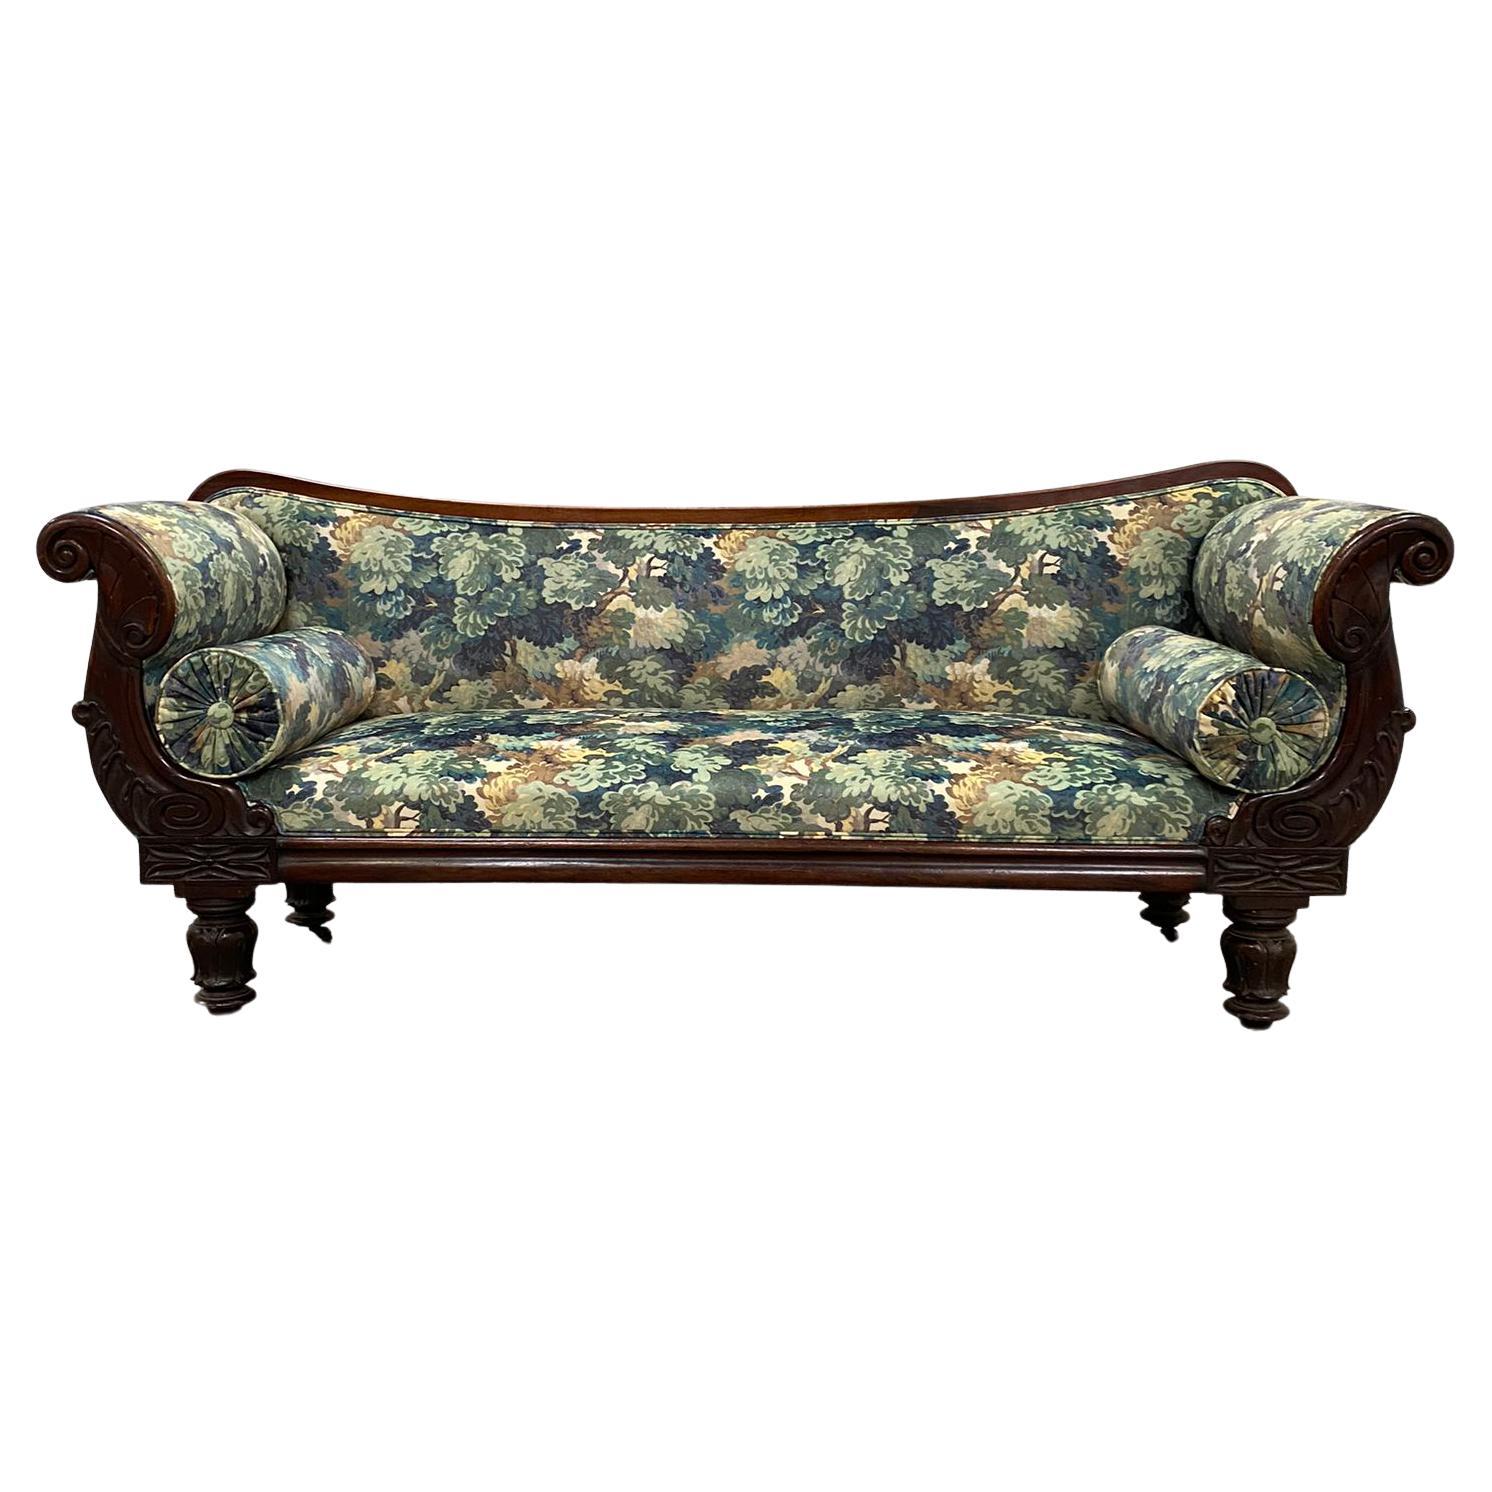 This superb William IV sofa is of fine quality and elegant form. It comprises of a mahogany frame and features an elegant shaped top rail, Egyptian revival arms and laurel leaf carved legs. 
The sofa is recently reupholstered in a stunning oak leaf